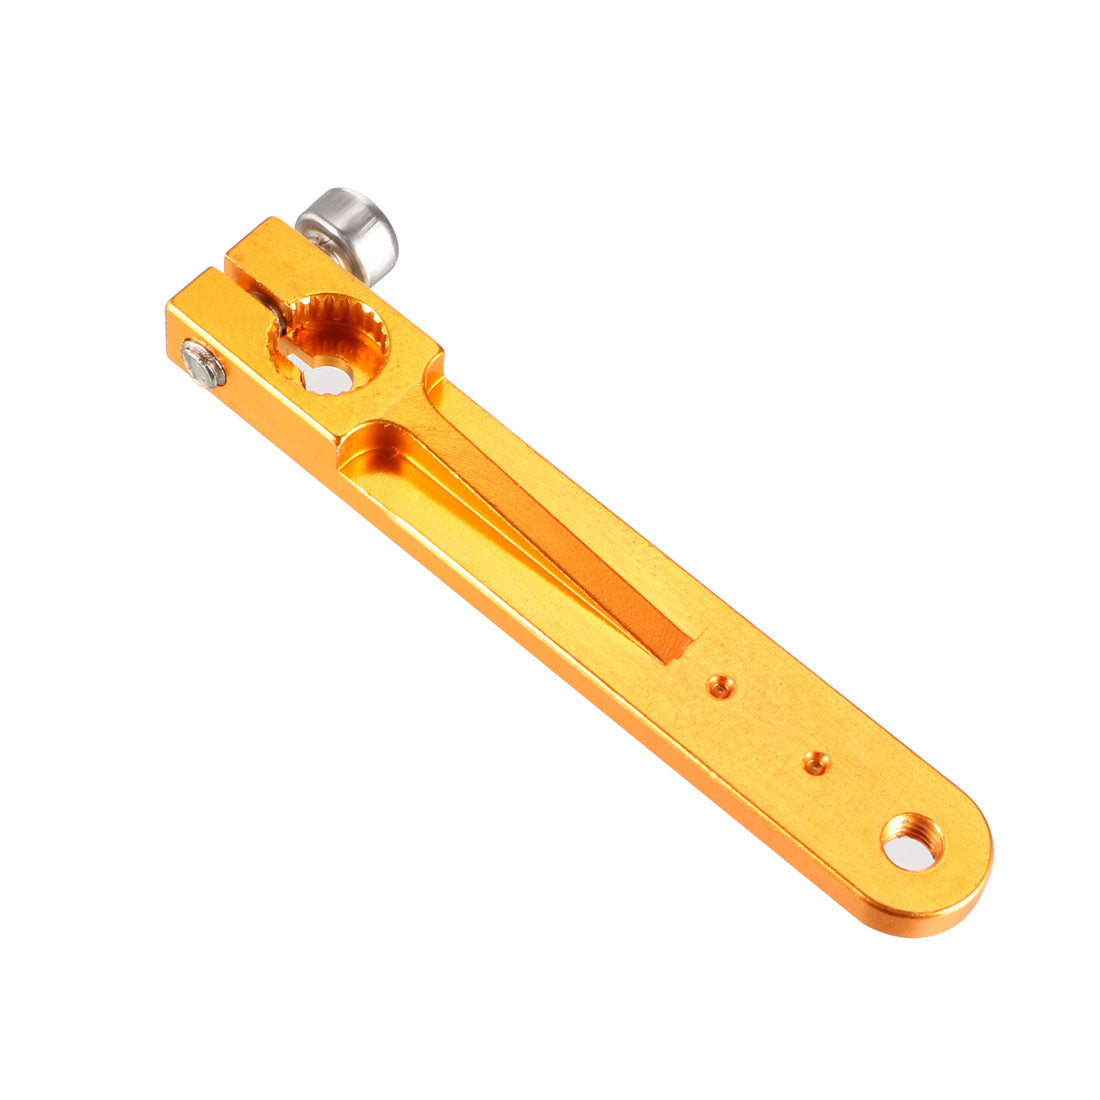 uxcell Uxcell Aluminum Servo Arms Single Arm 23T M3 Thread Yellow, for 1.5 Inch JR